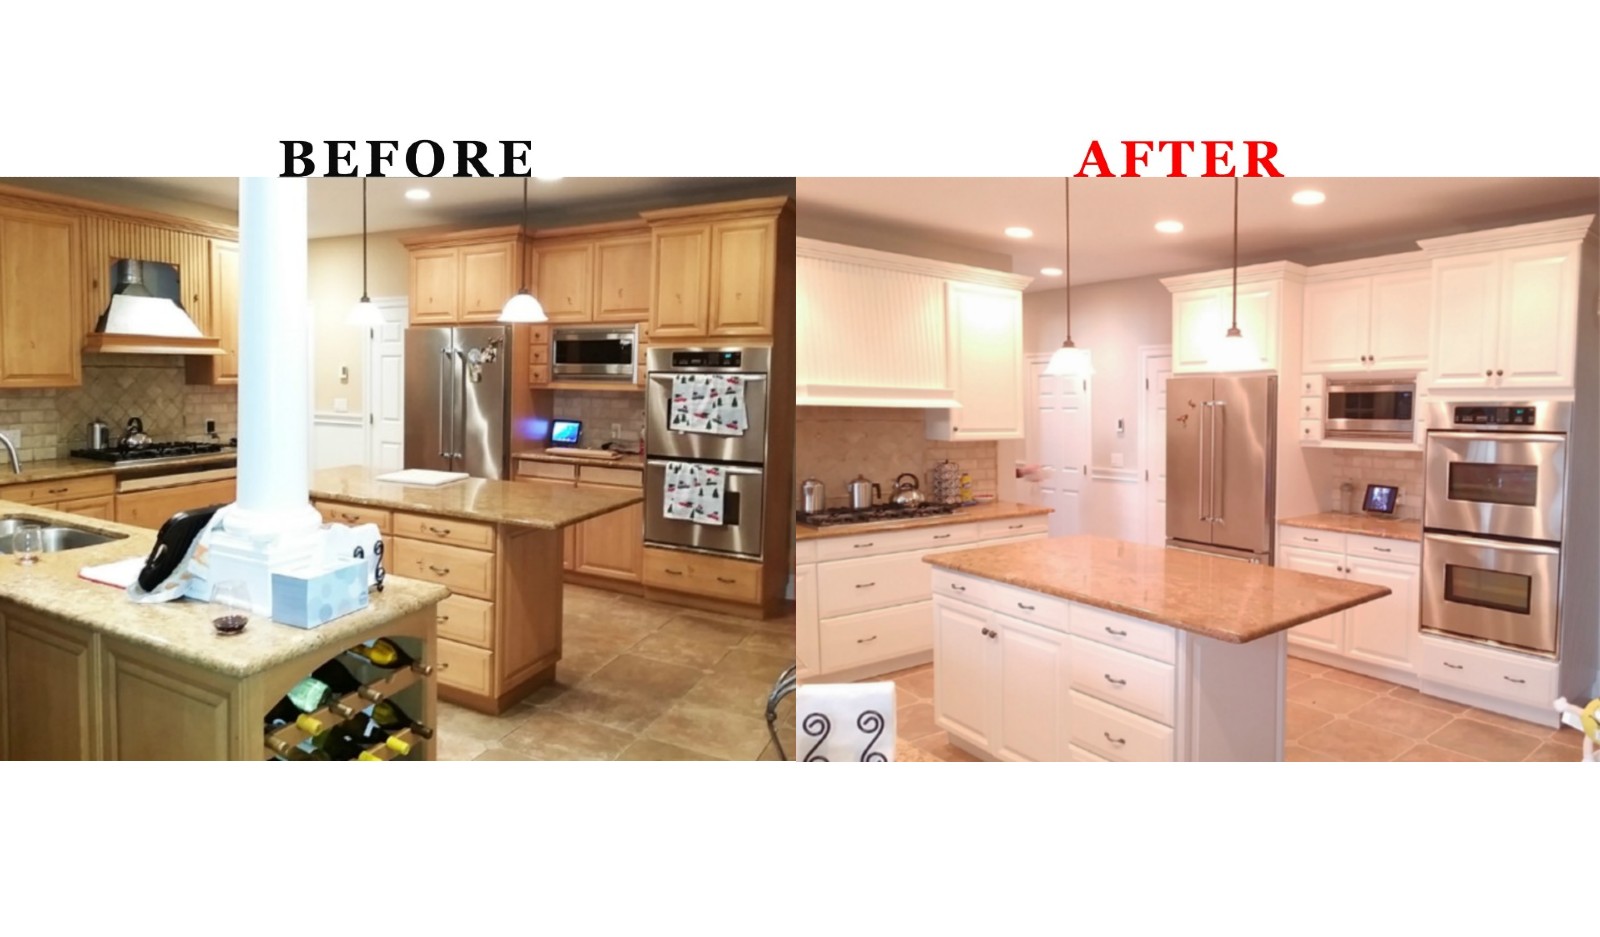 Before And After Pics Of Painted Kitchen Cabinets Things In The Kitchen